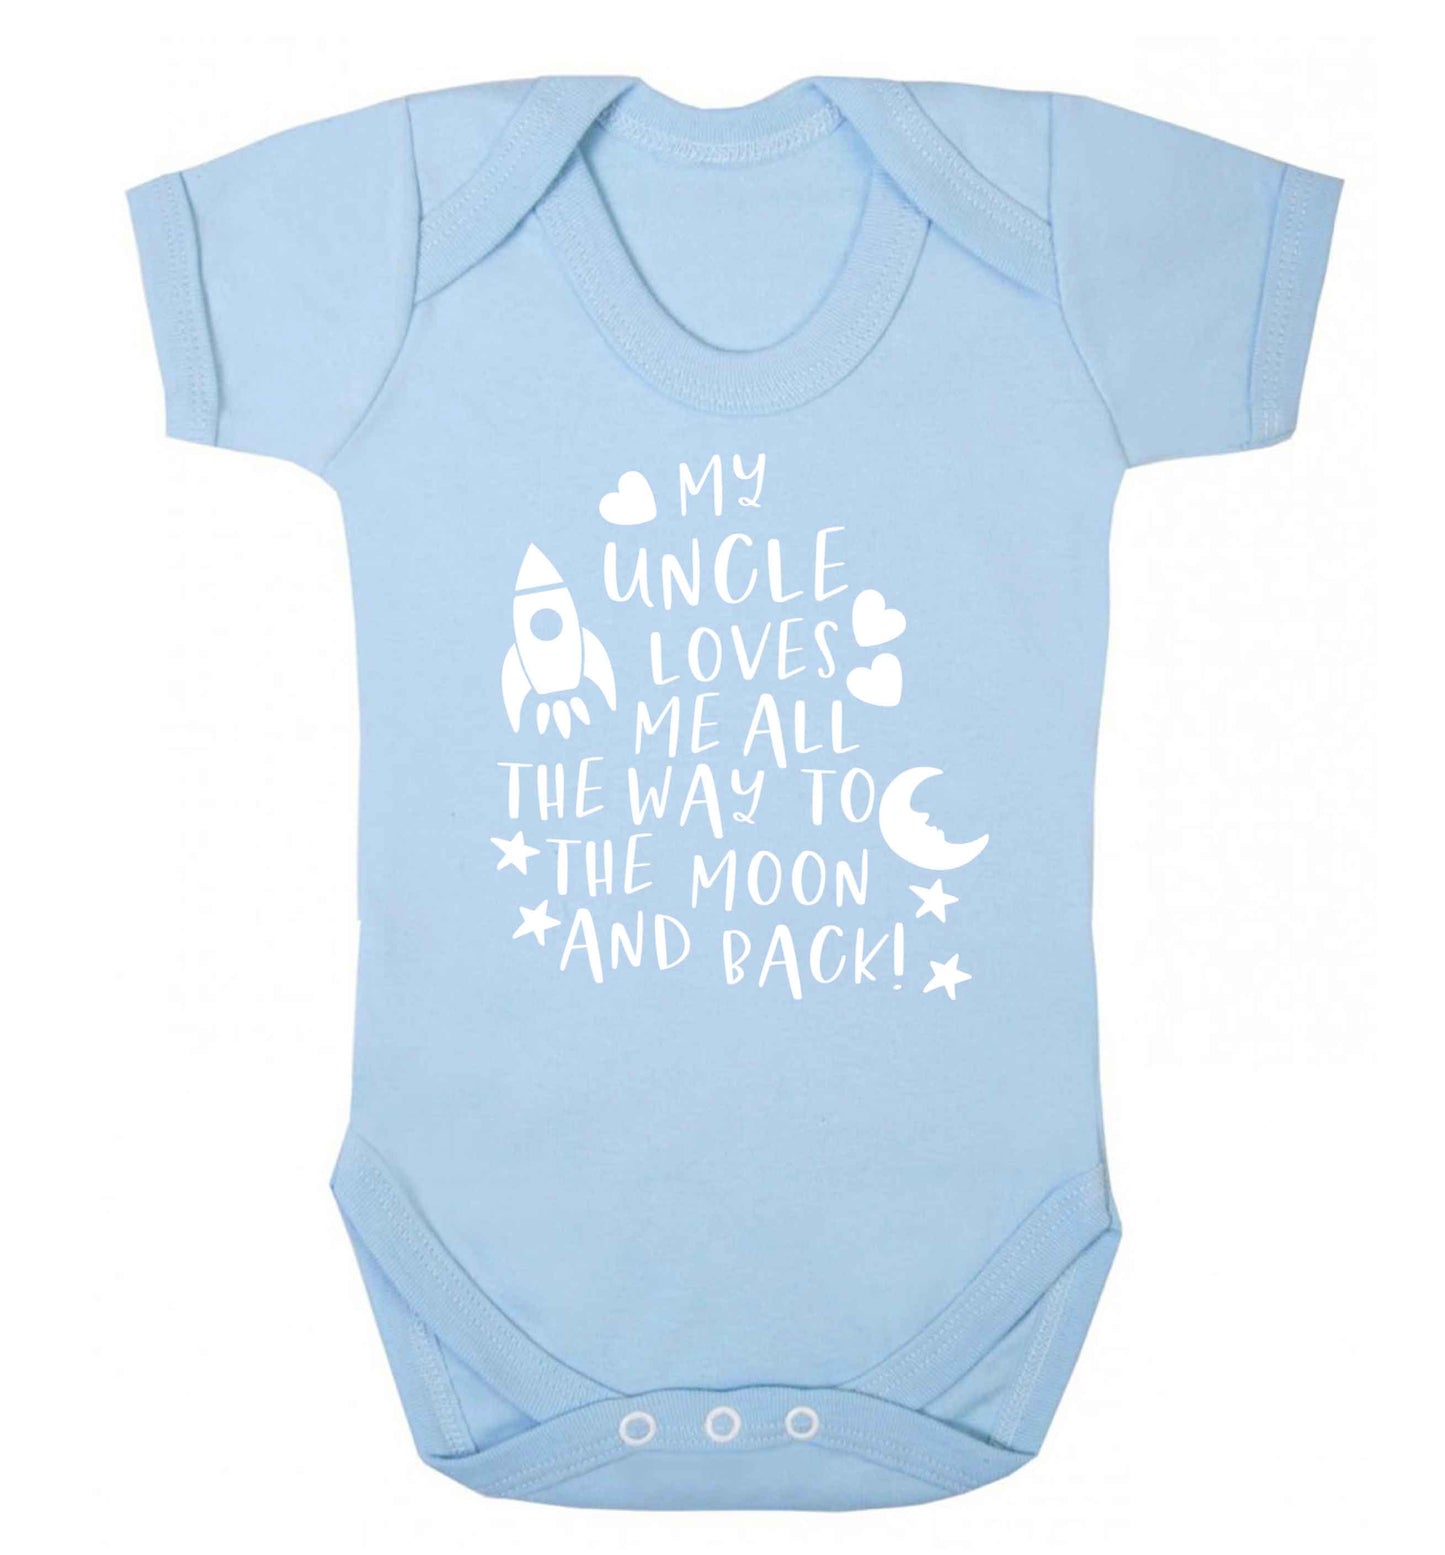 My uncle loves me all the way to the moon and back Baby Vest pale blue 18-24 months